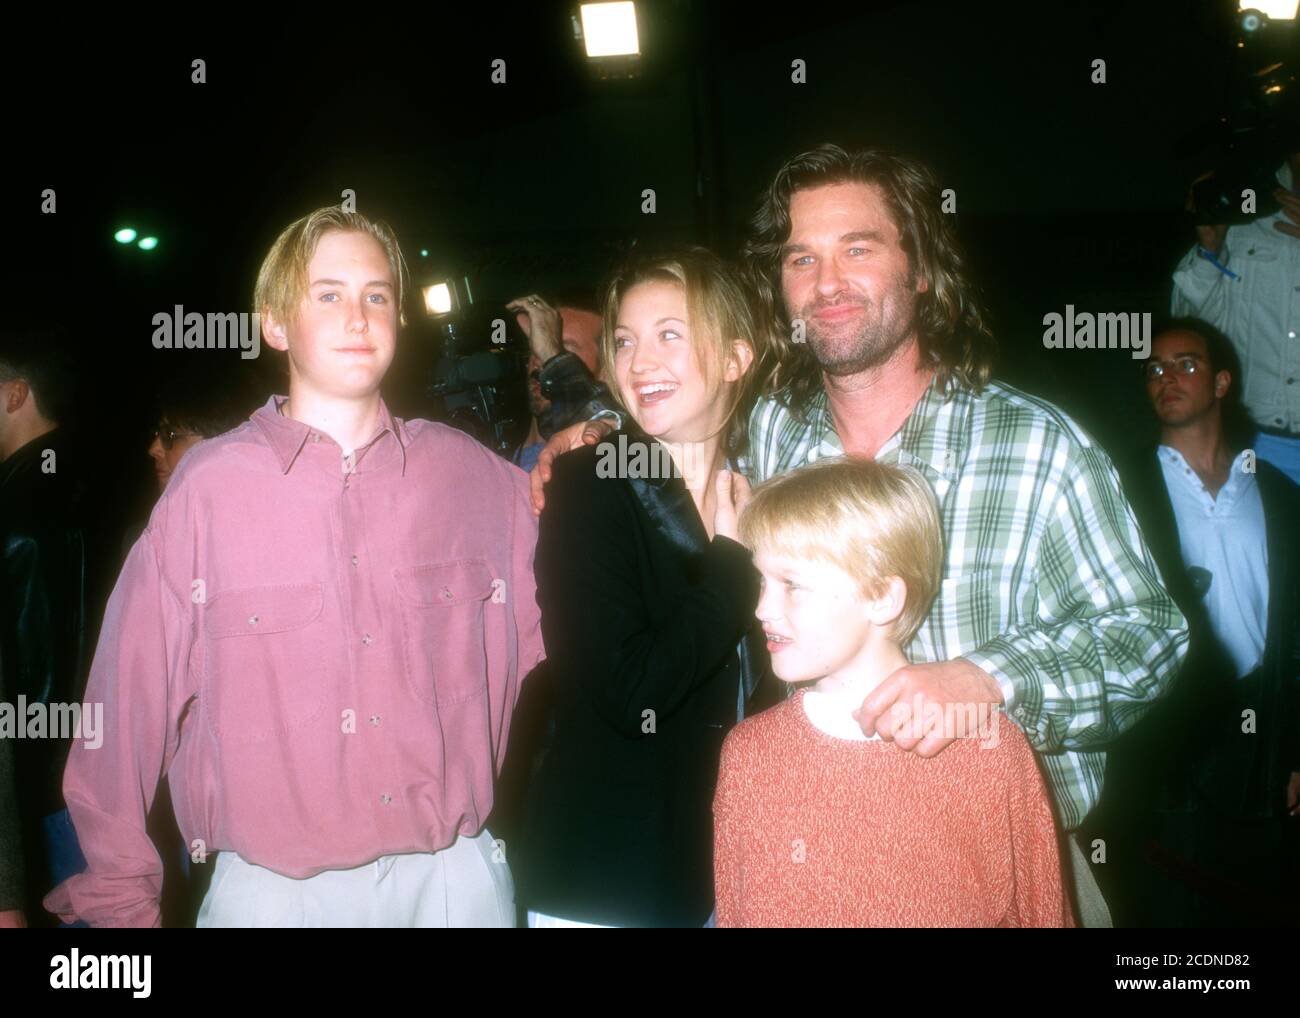 Westwood, California, USA 11th March 1996 (L-R) Boston Russell, Actress Kate Hudson, actor Kurt Russell and son Wyatt Russell attend Warner Bros. Pictures' 'Executive Decision' Premiere on March 11, 1996 at Mann Village Theatre in Westwood, California, USA. Photo by Barry King/Alamy Stock Photo Stock Photo